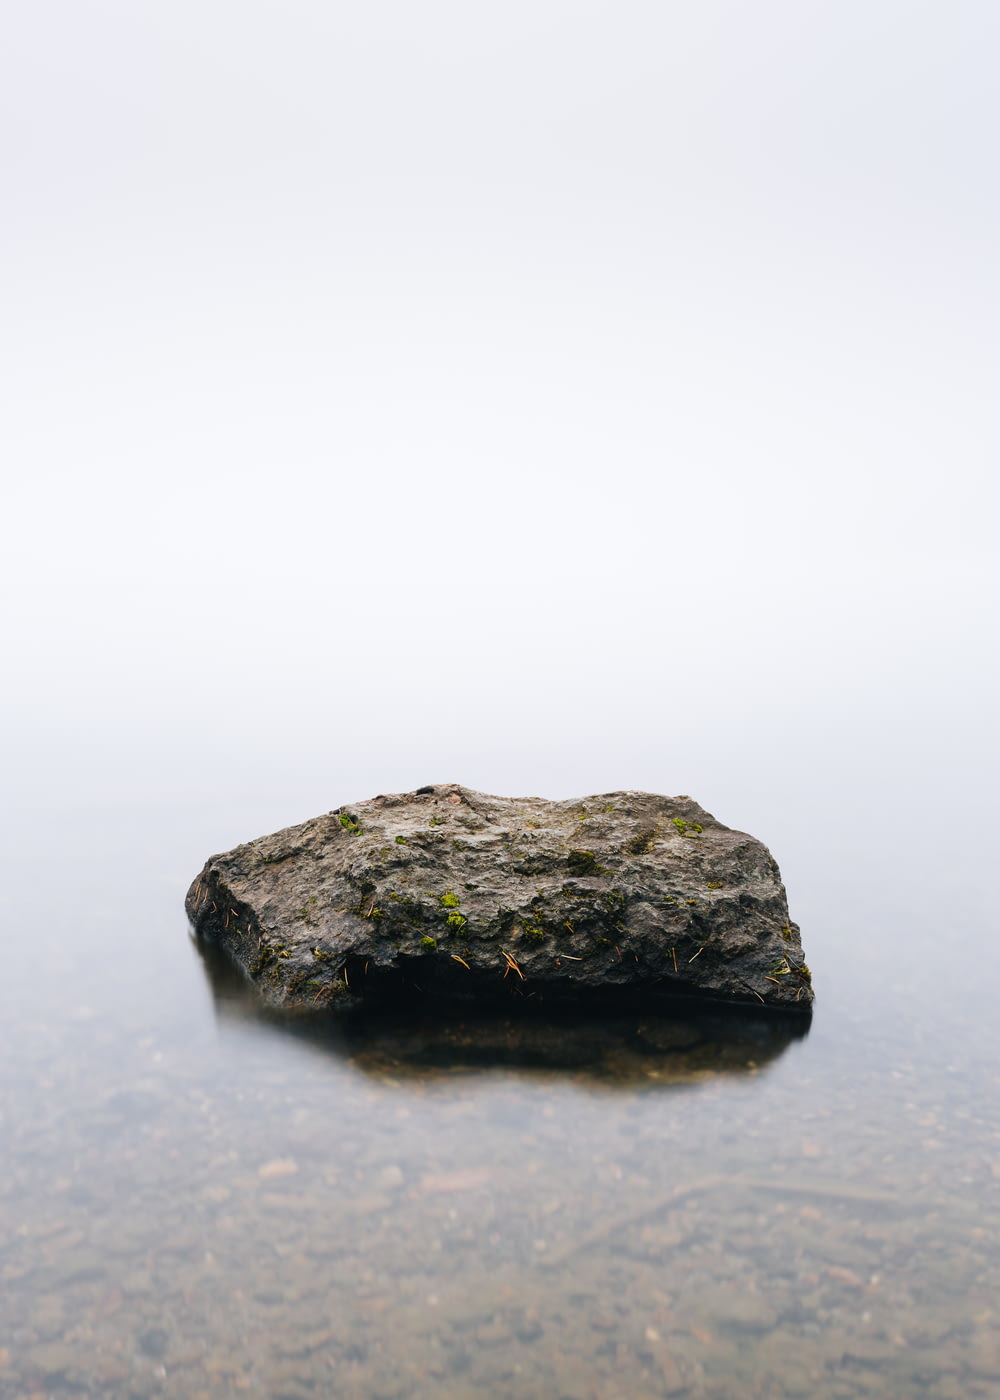 brown stone in body of calm water